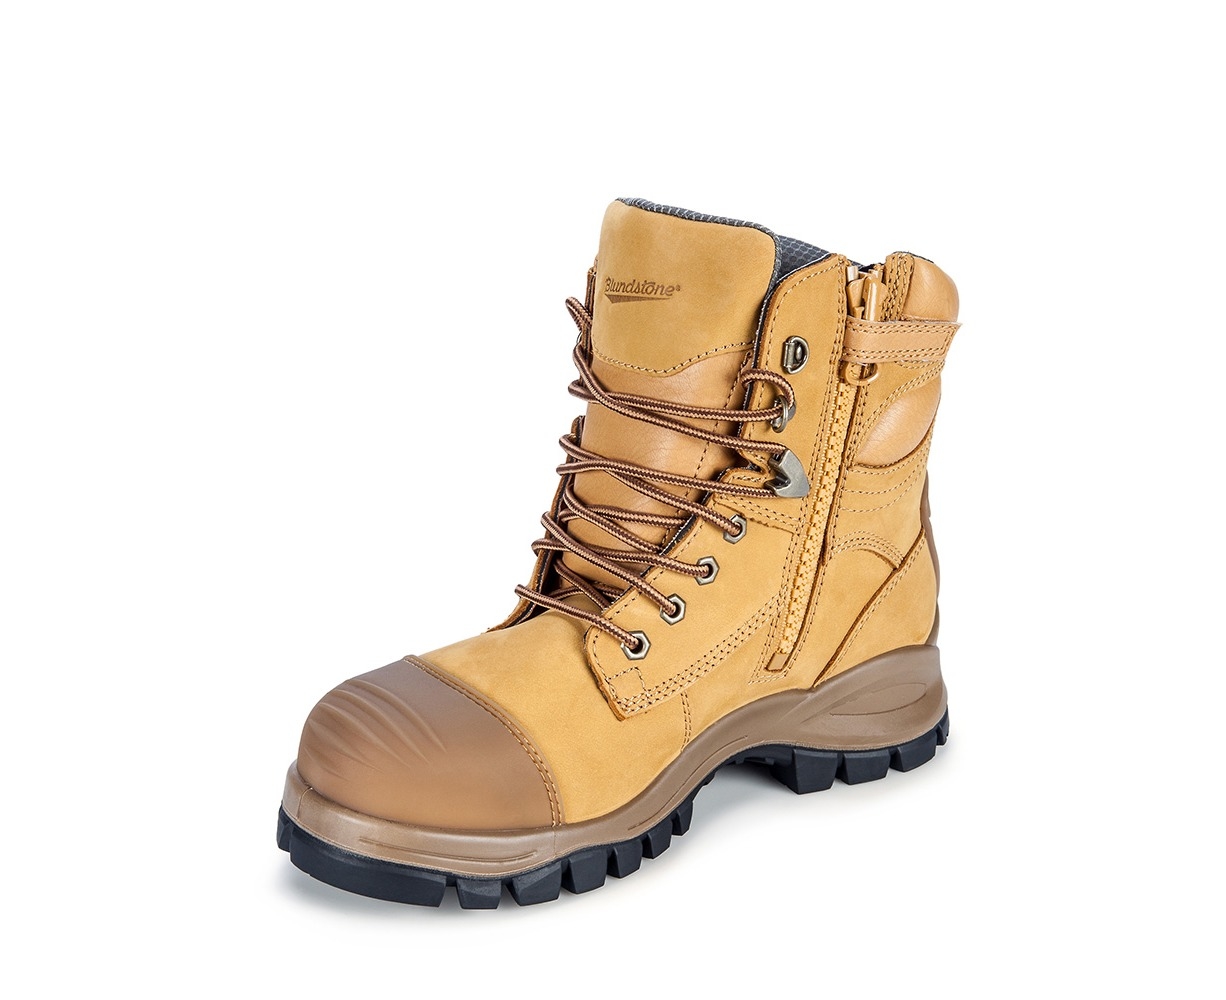 blundstone boots cyber monday